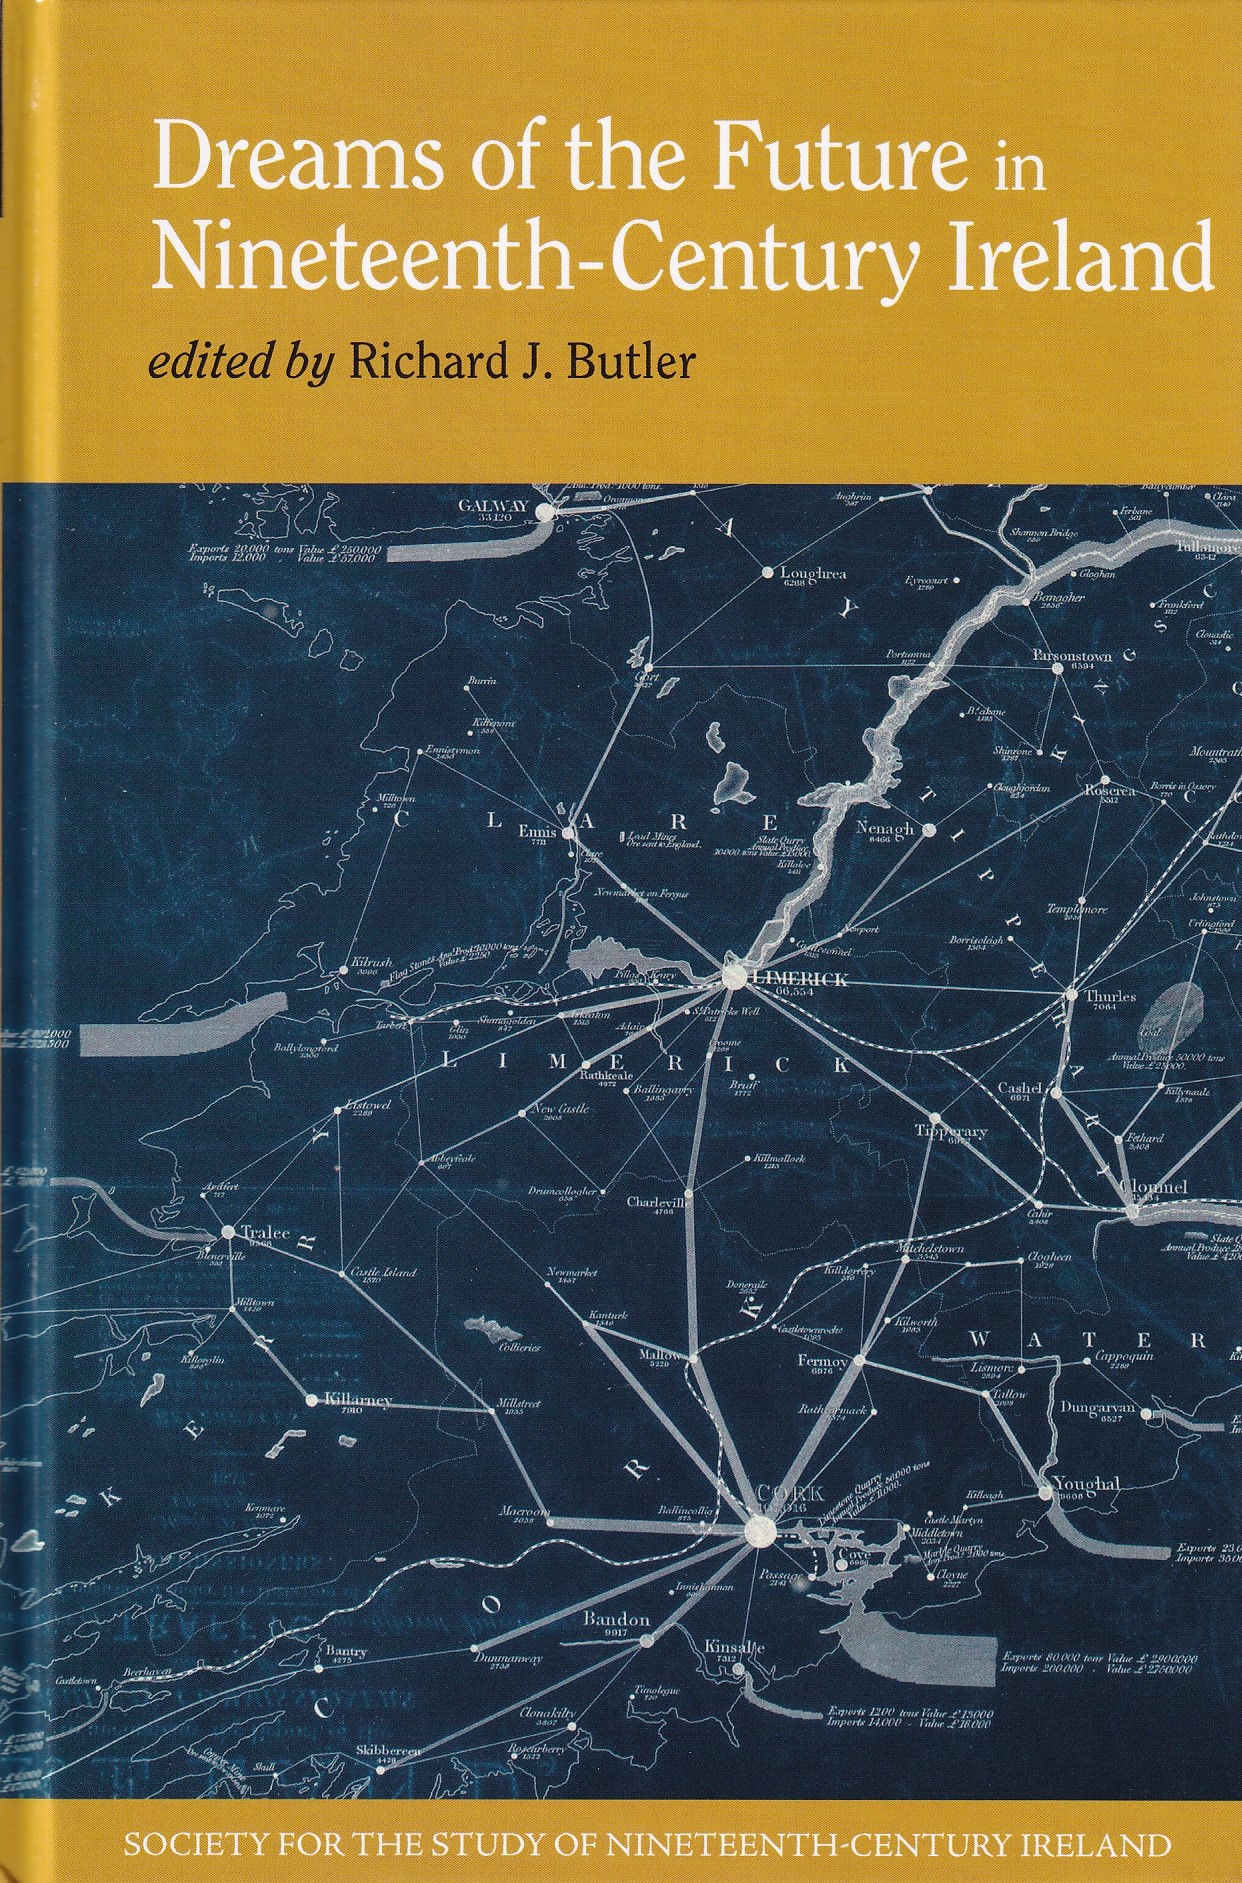 Dreams of the Future in Nineteenth-Century Ireland | Richard J. Butler (ed.) | Charlie Byrne's